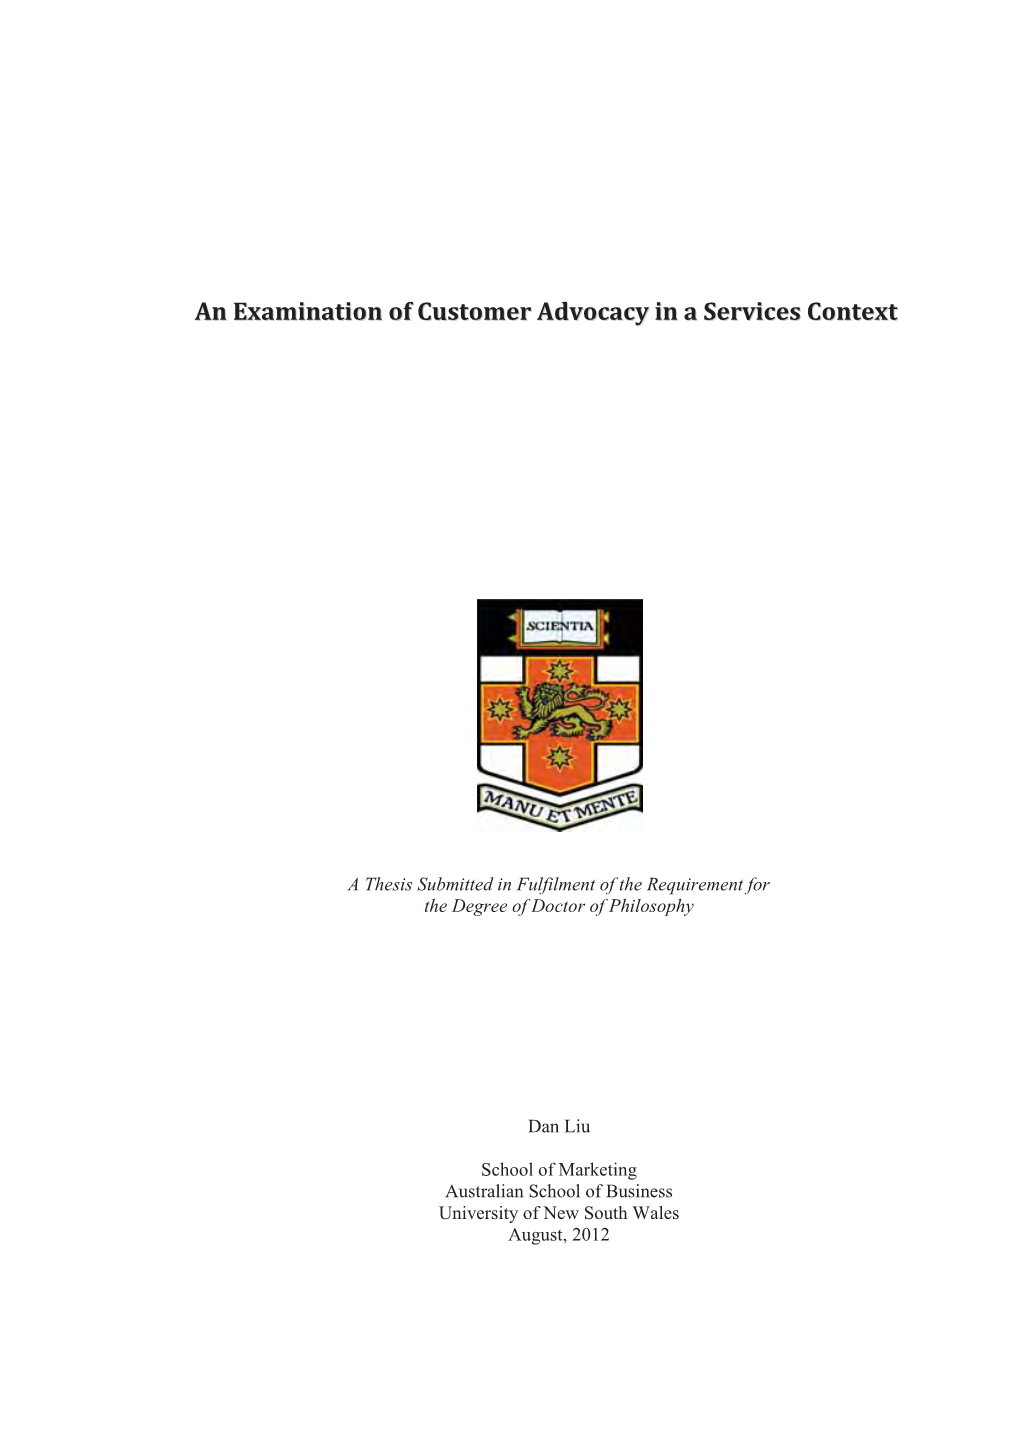 An Examination of Customer Advocacy in a Services Context